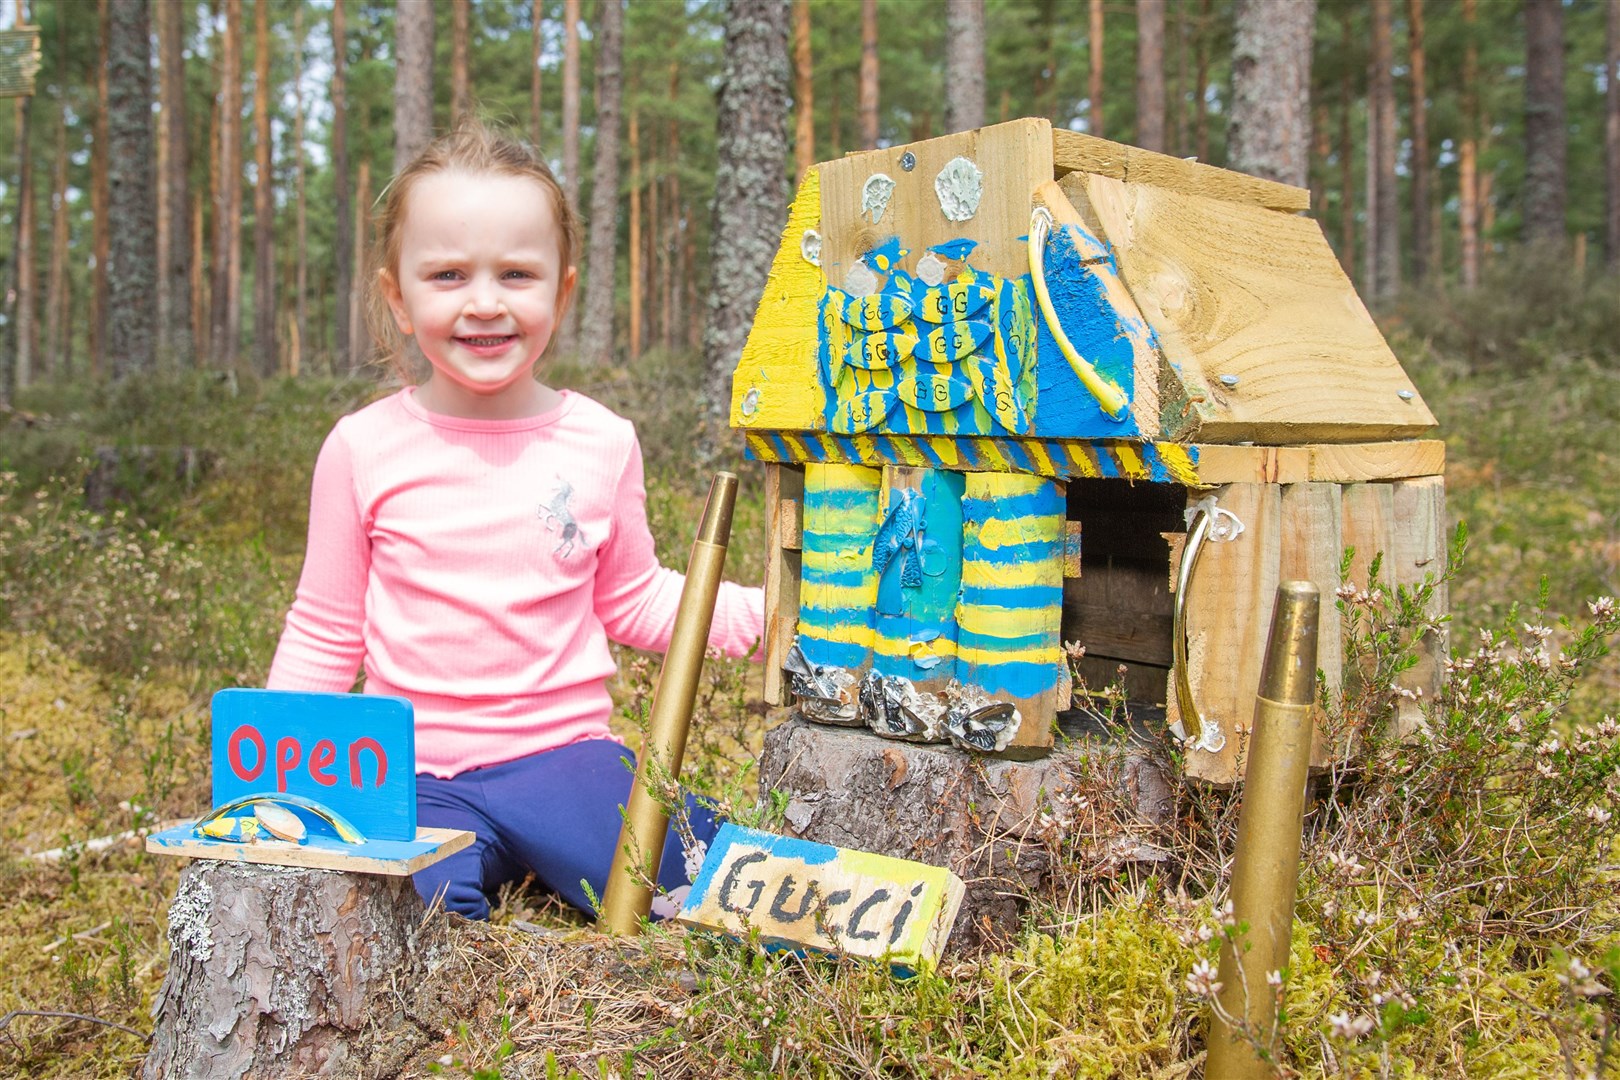 Mia Chilton takes a look at the Gucci store. A small village has been made out of wooden houses and household items in the Lossie Forest woodland. Picture: Daniel Forsyth.